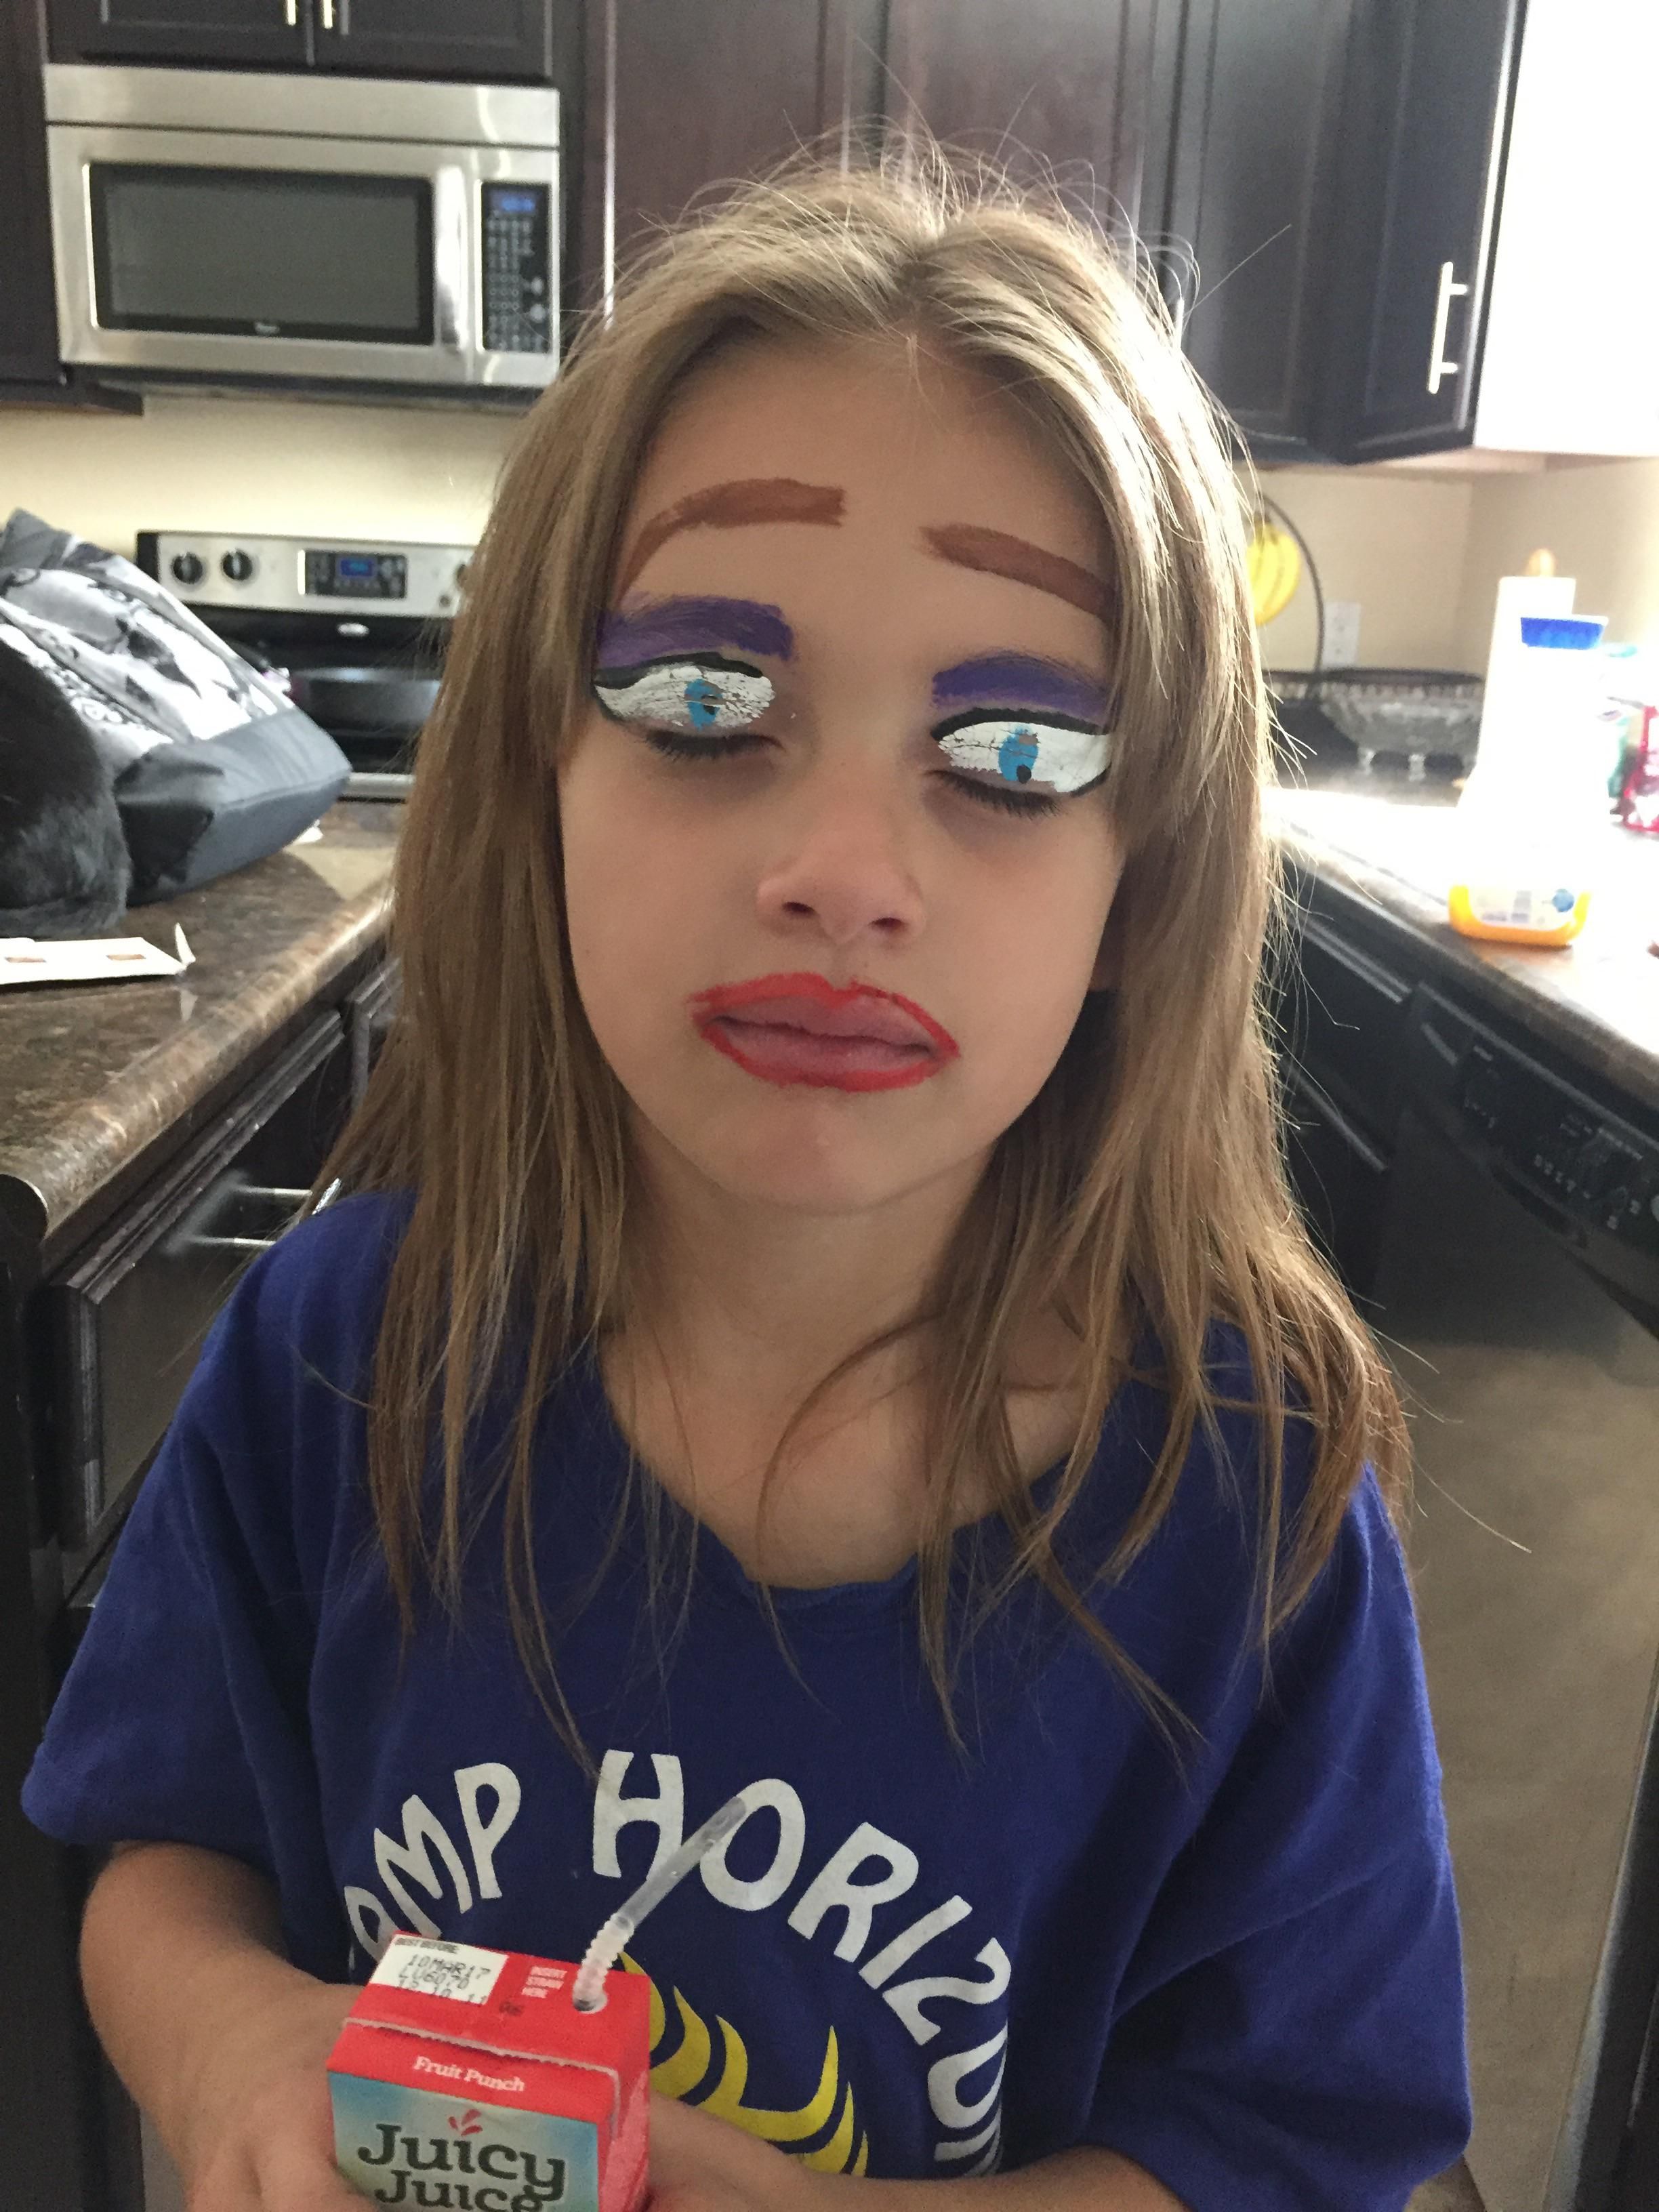 That time my daughter got her face painted at summer camp. She was very offended that I couldn’t tell she was “Elsa from Frozen”.